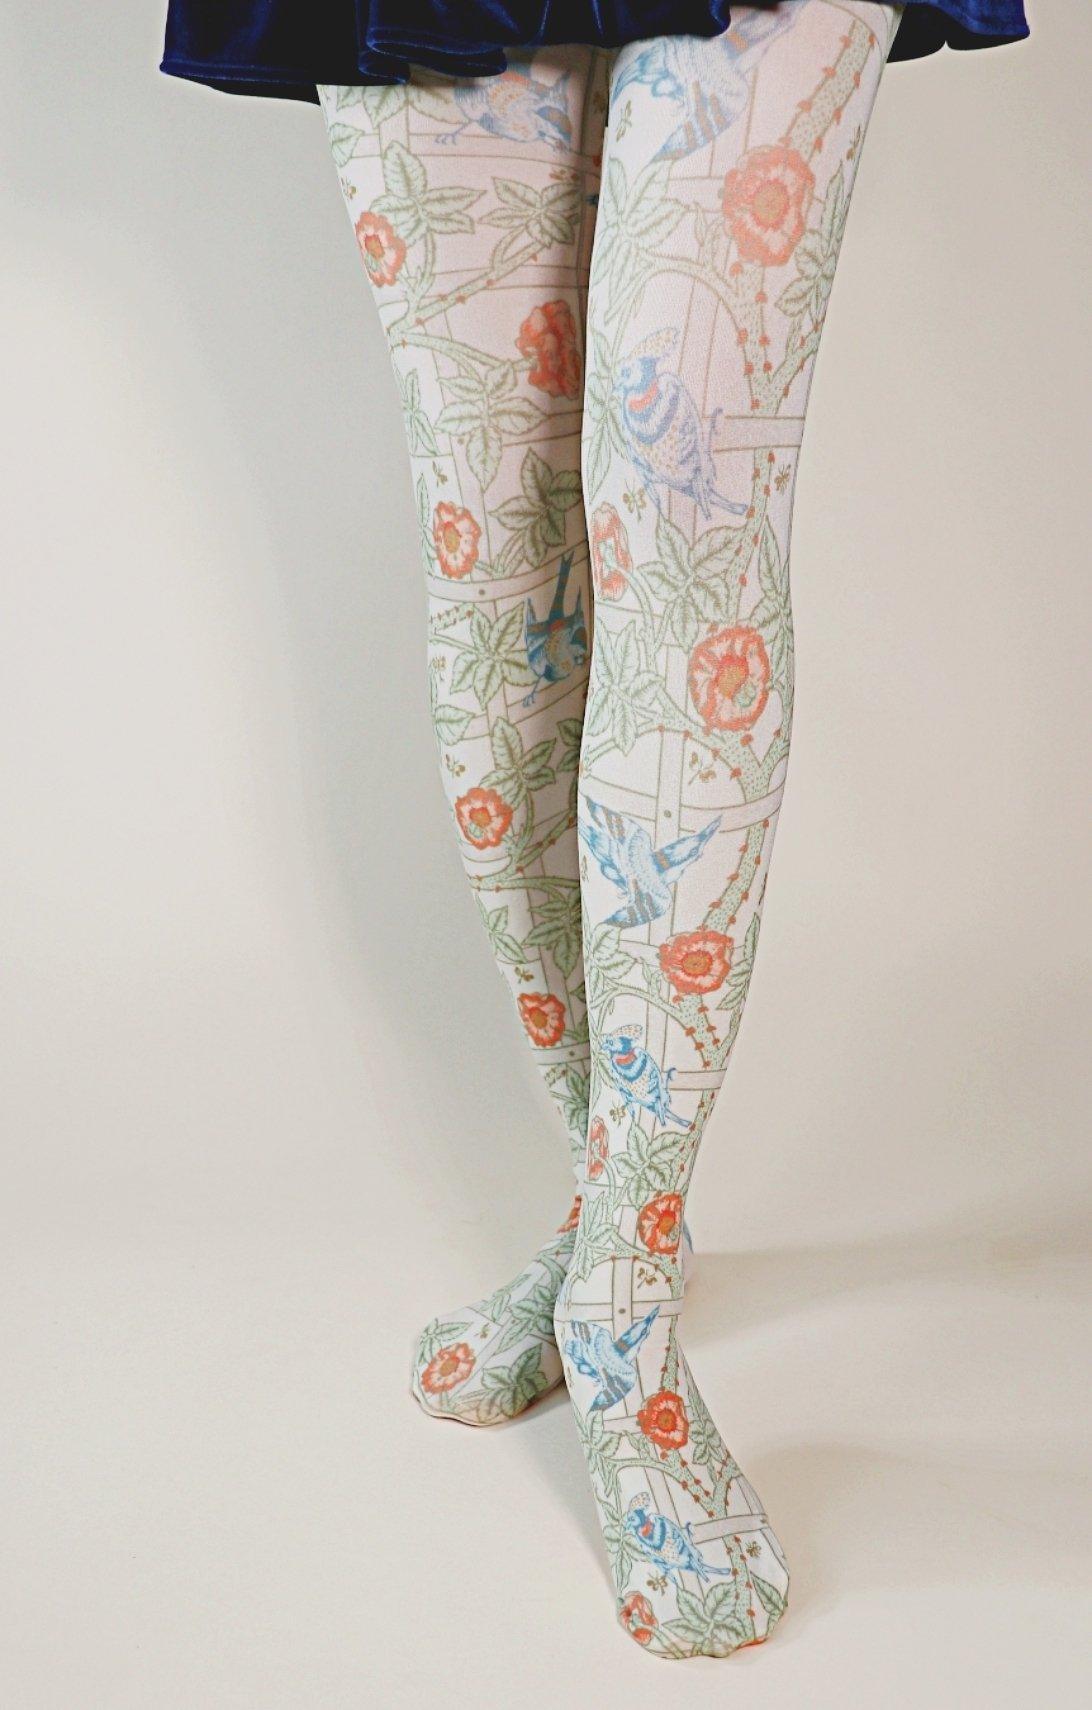 Trellis or Pomegranate by William Morris | Printed Tights - Tabbisocks - The Sock Monster